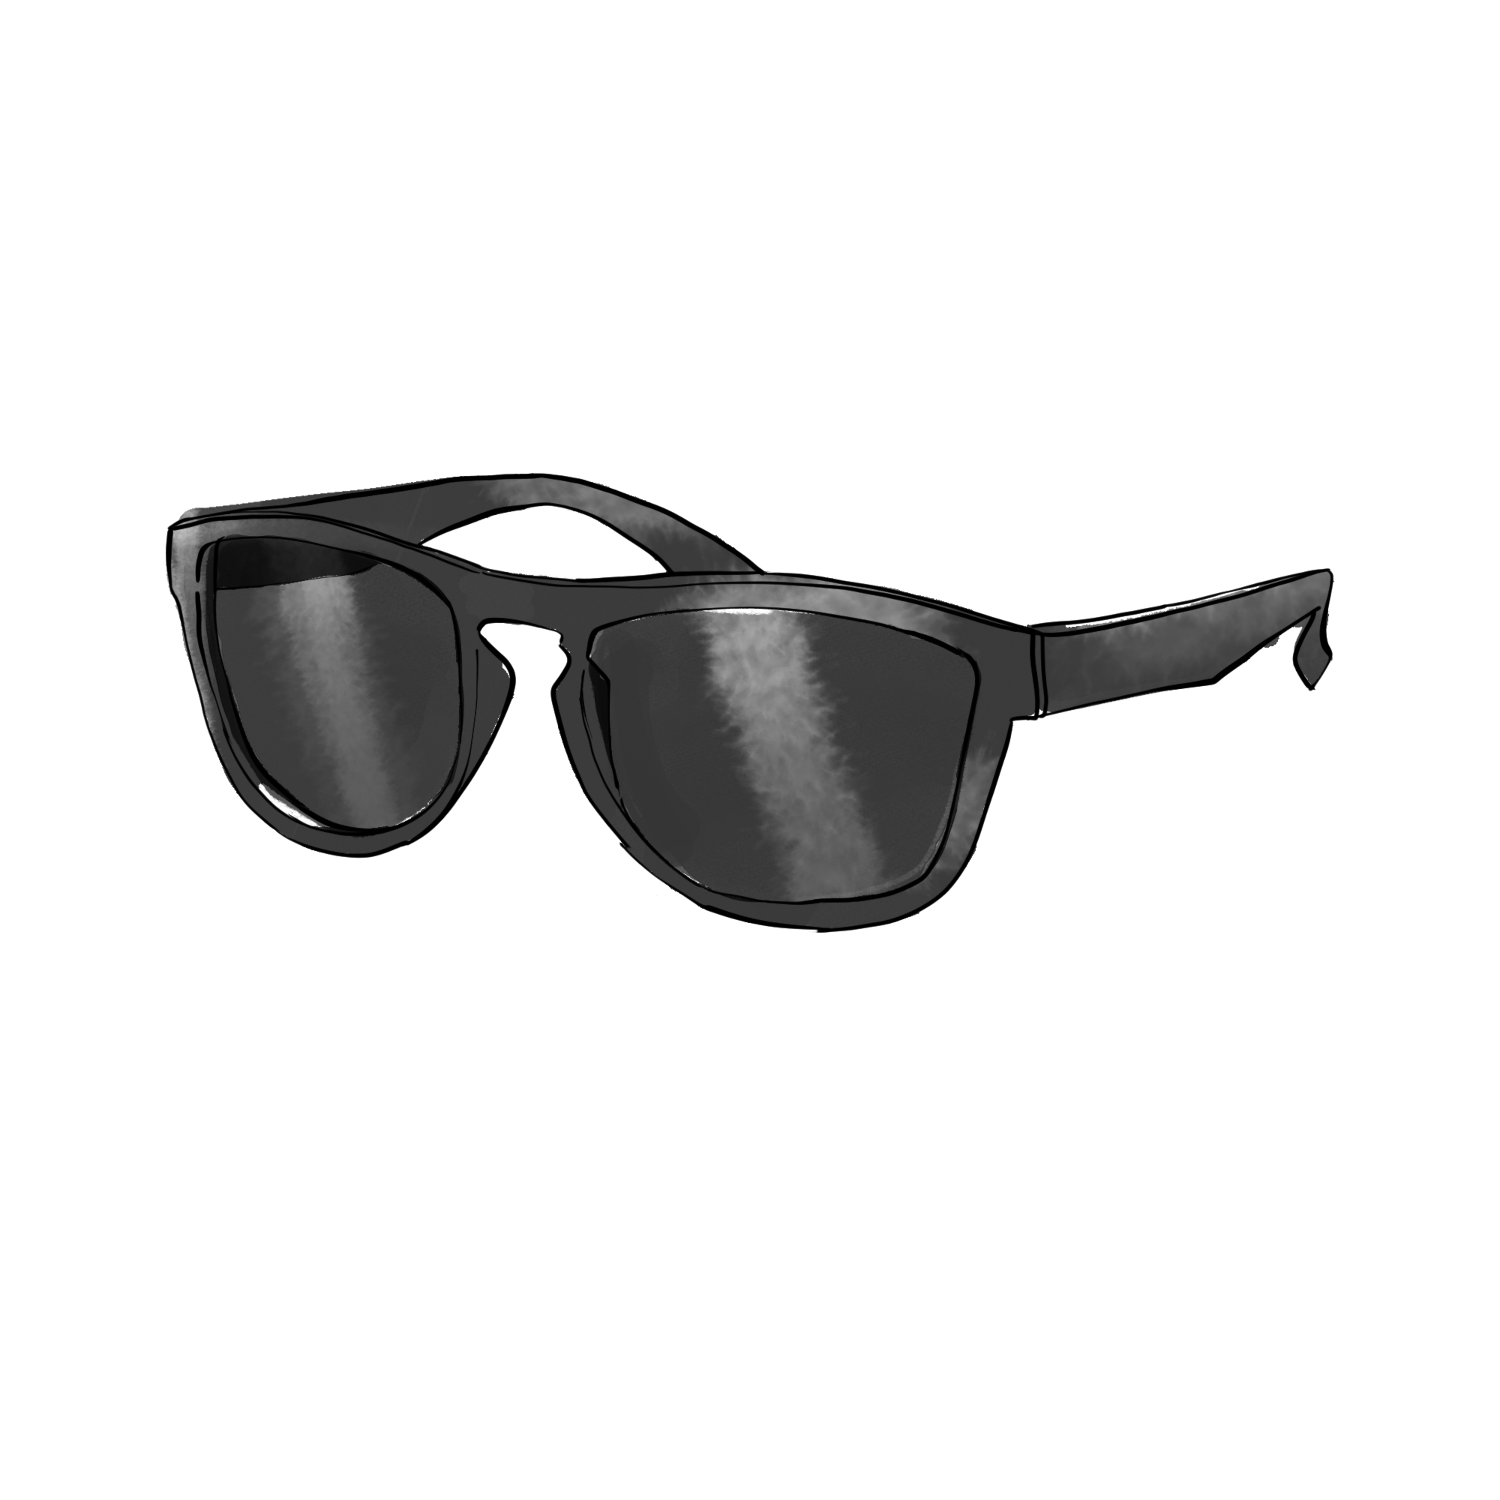  Product image 1 of the product “Midnight - All Black ”